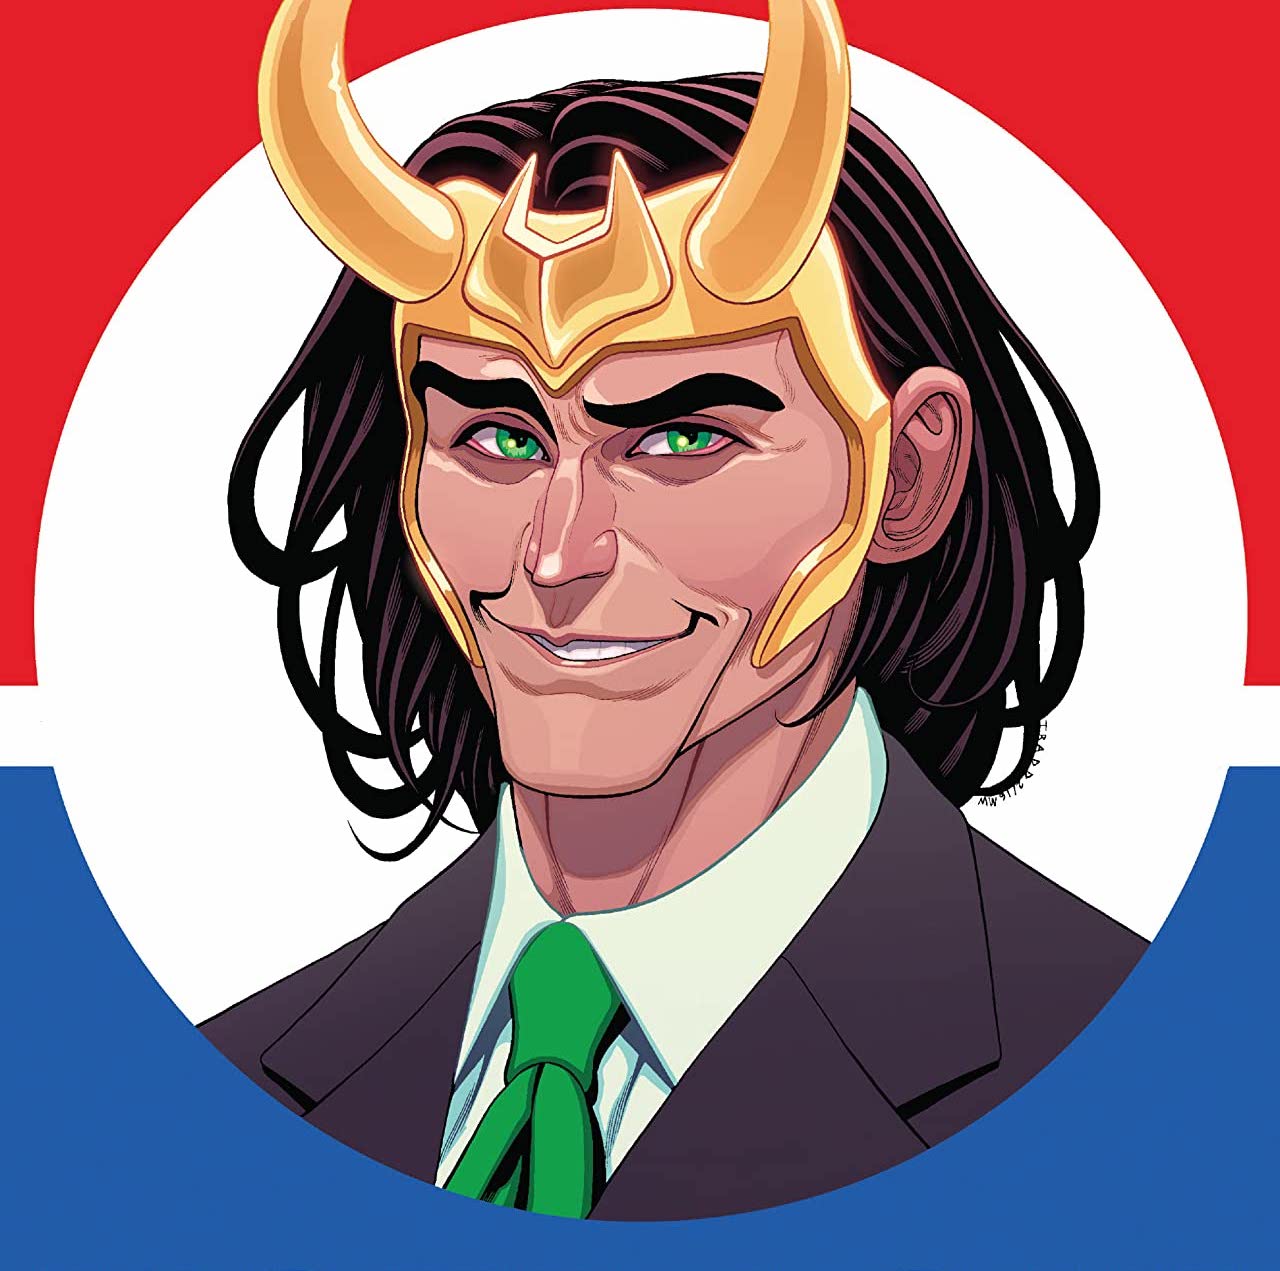 'Vote Loki' cleverly mixes politics, lying, and the responsibility of being president